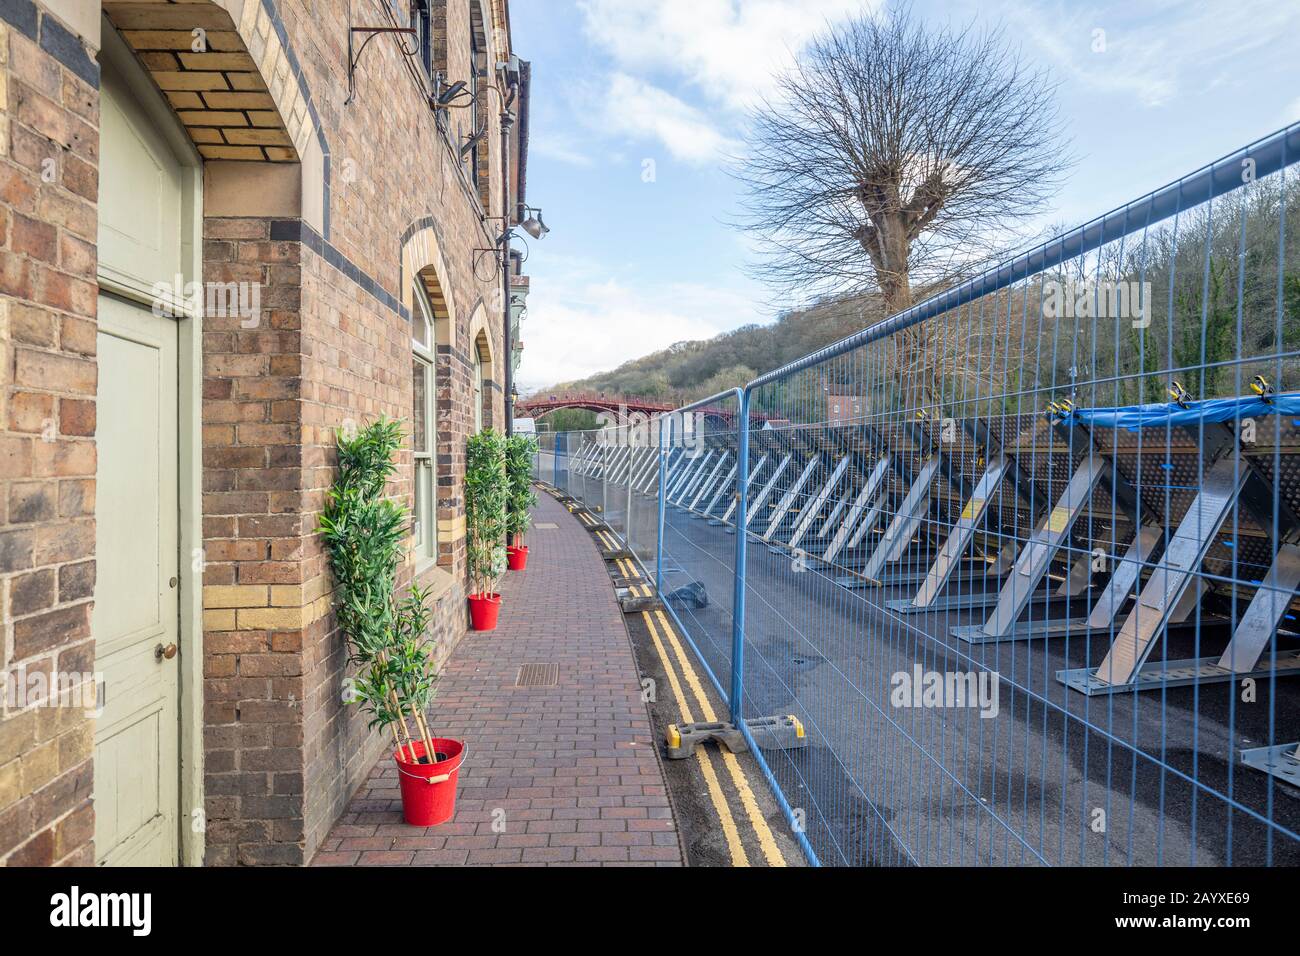 IRONBRIDGE, SHROPSHIRE, UNITED KINGDOM - FEBRUARY, 2020: Main street reinforcement by environmental agency preventing River Severn flooding after Stor Stock Photo